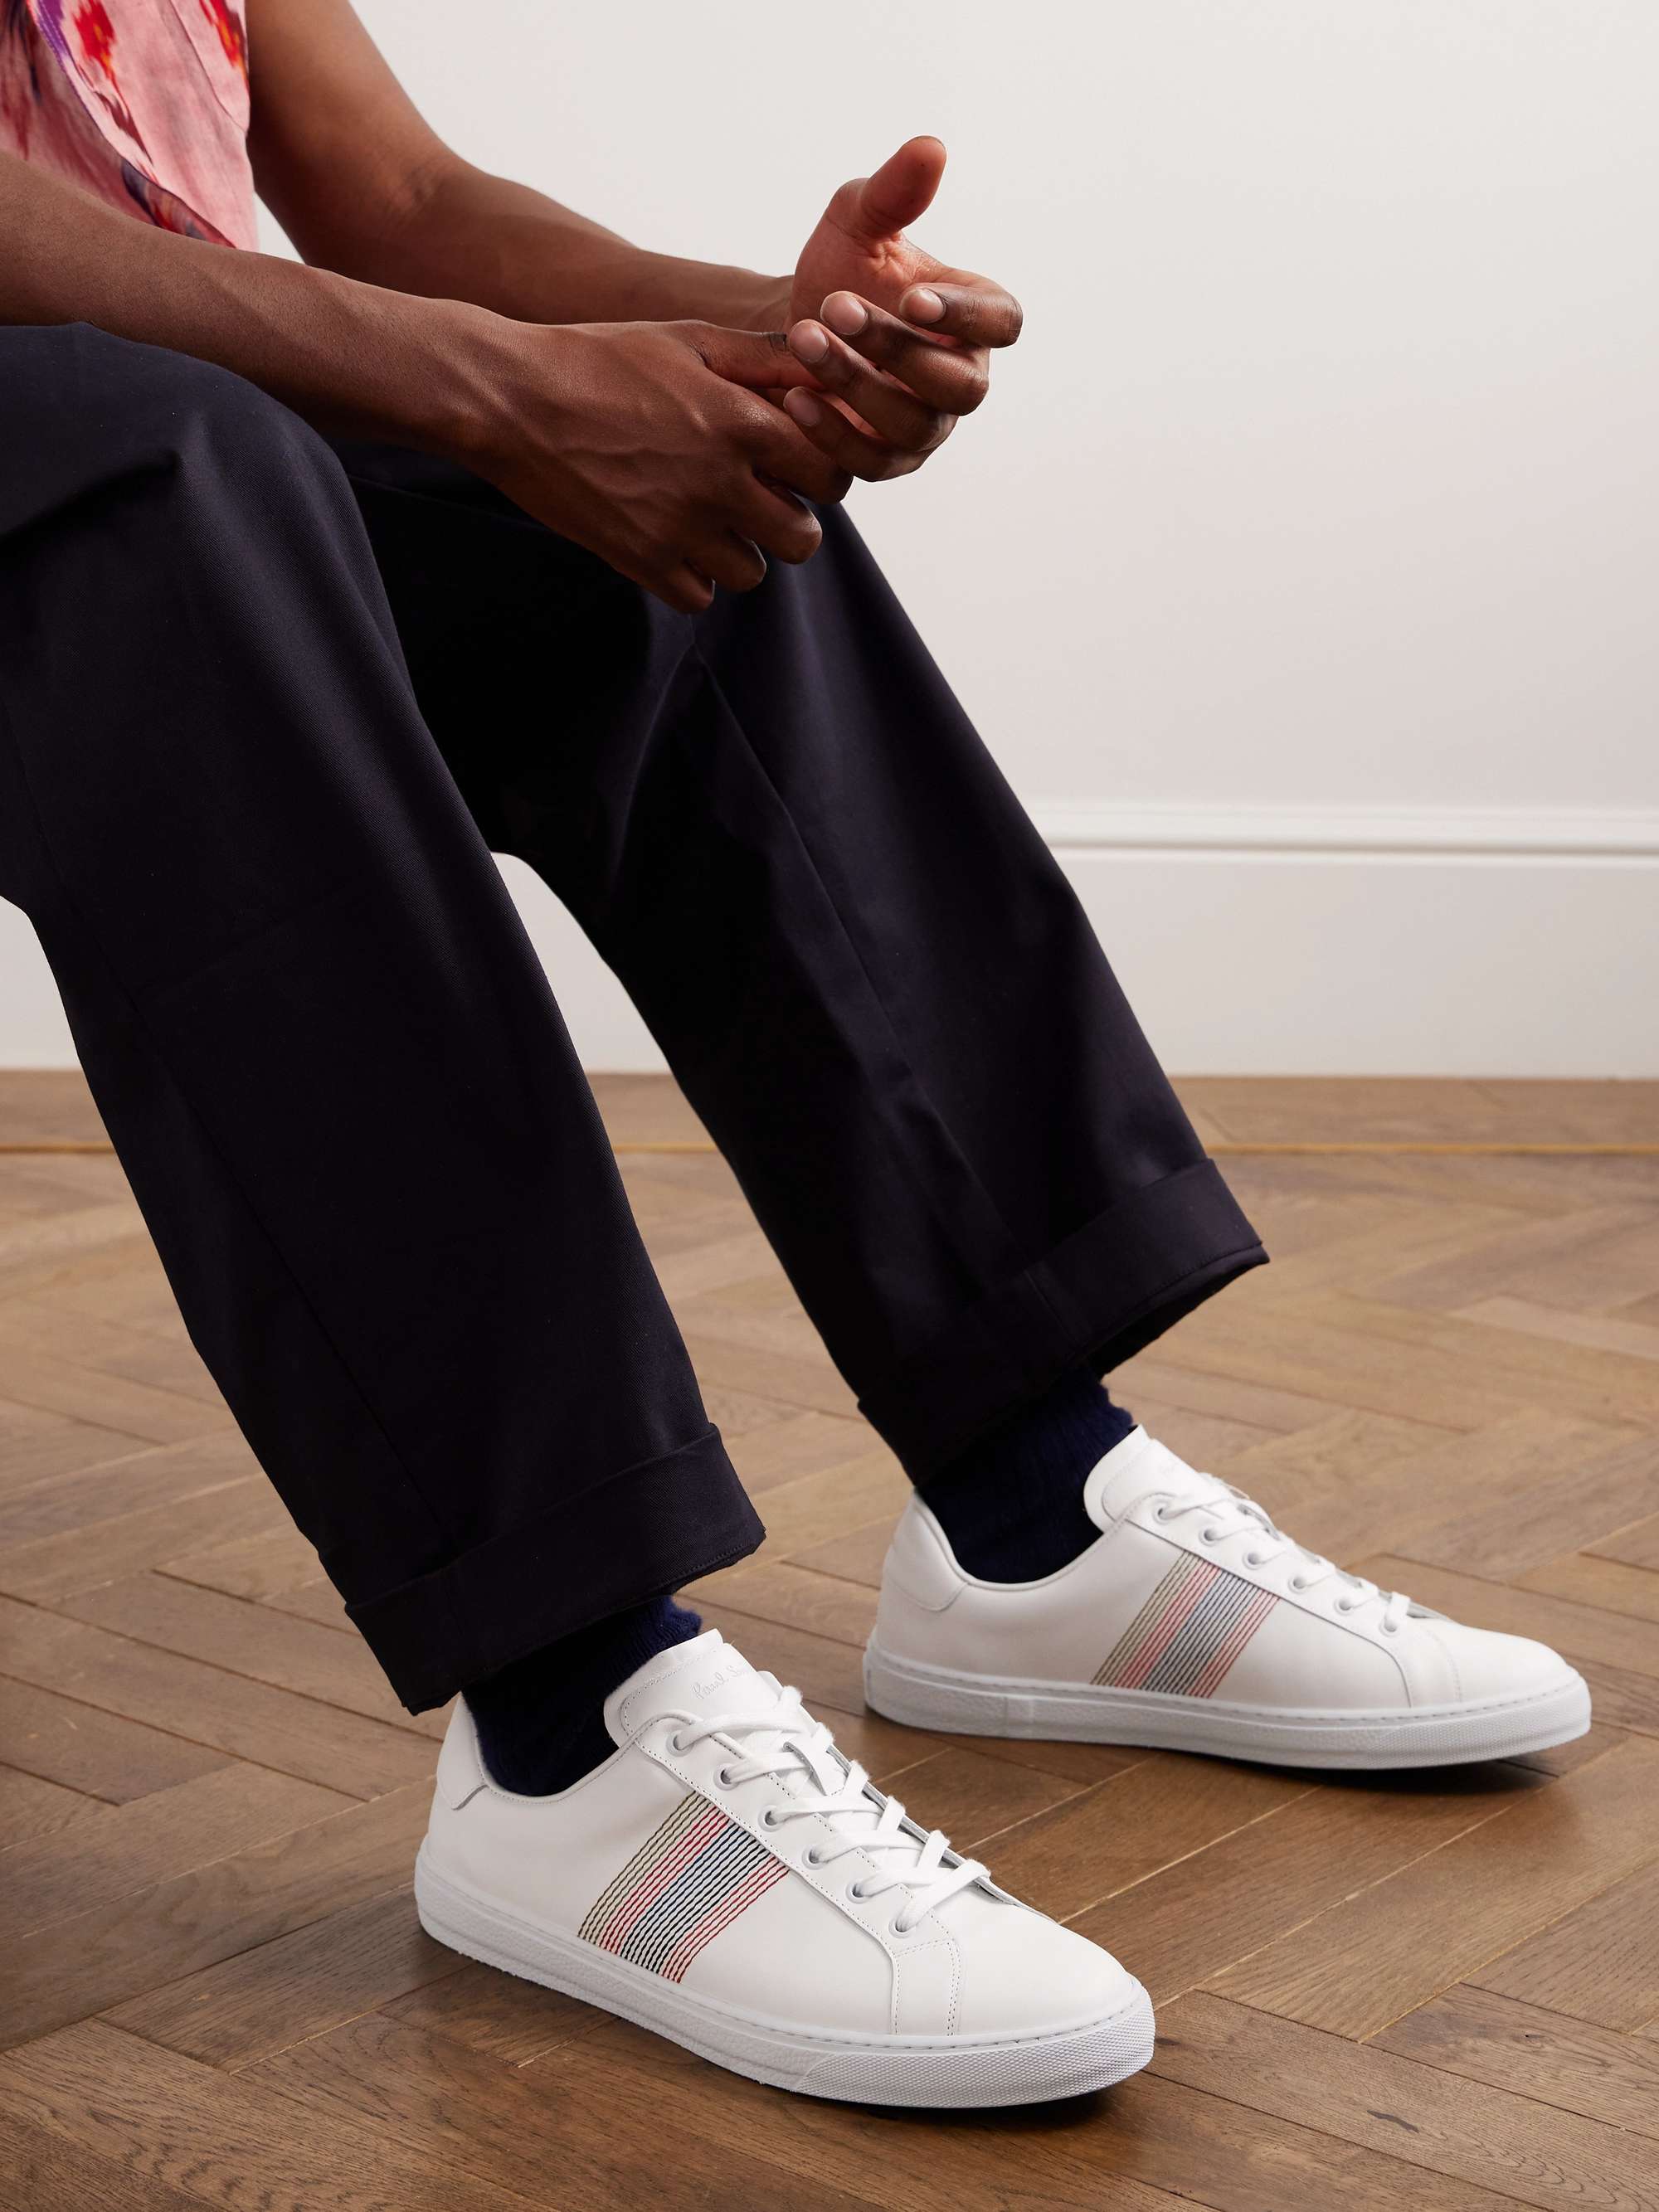 PAUL SMITH Hansen Embroidered Leather Sneakers for Men | MR PORTER